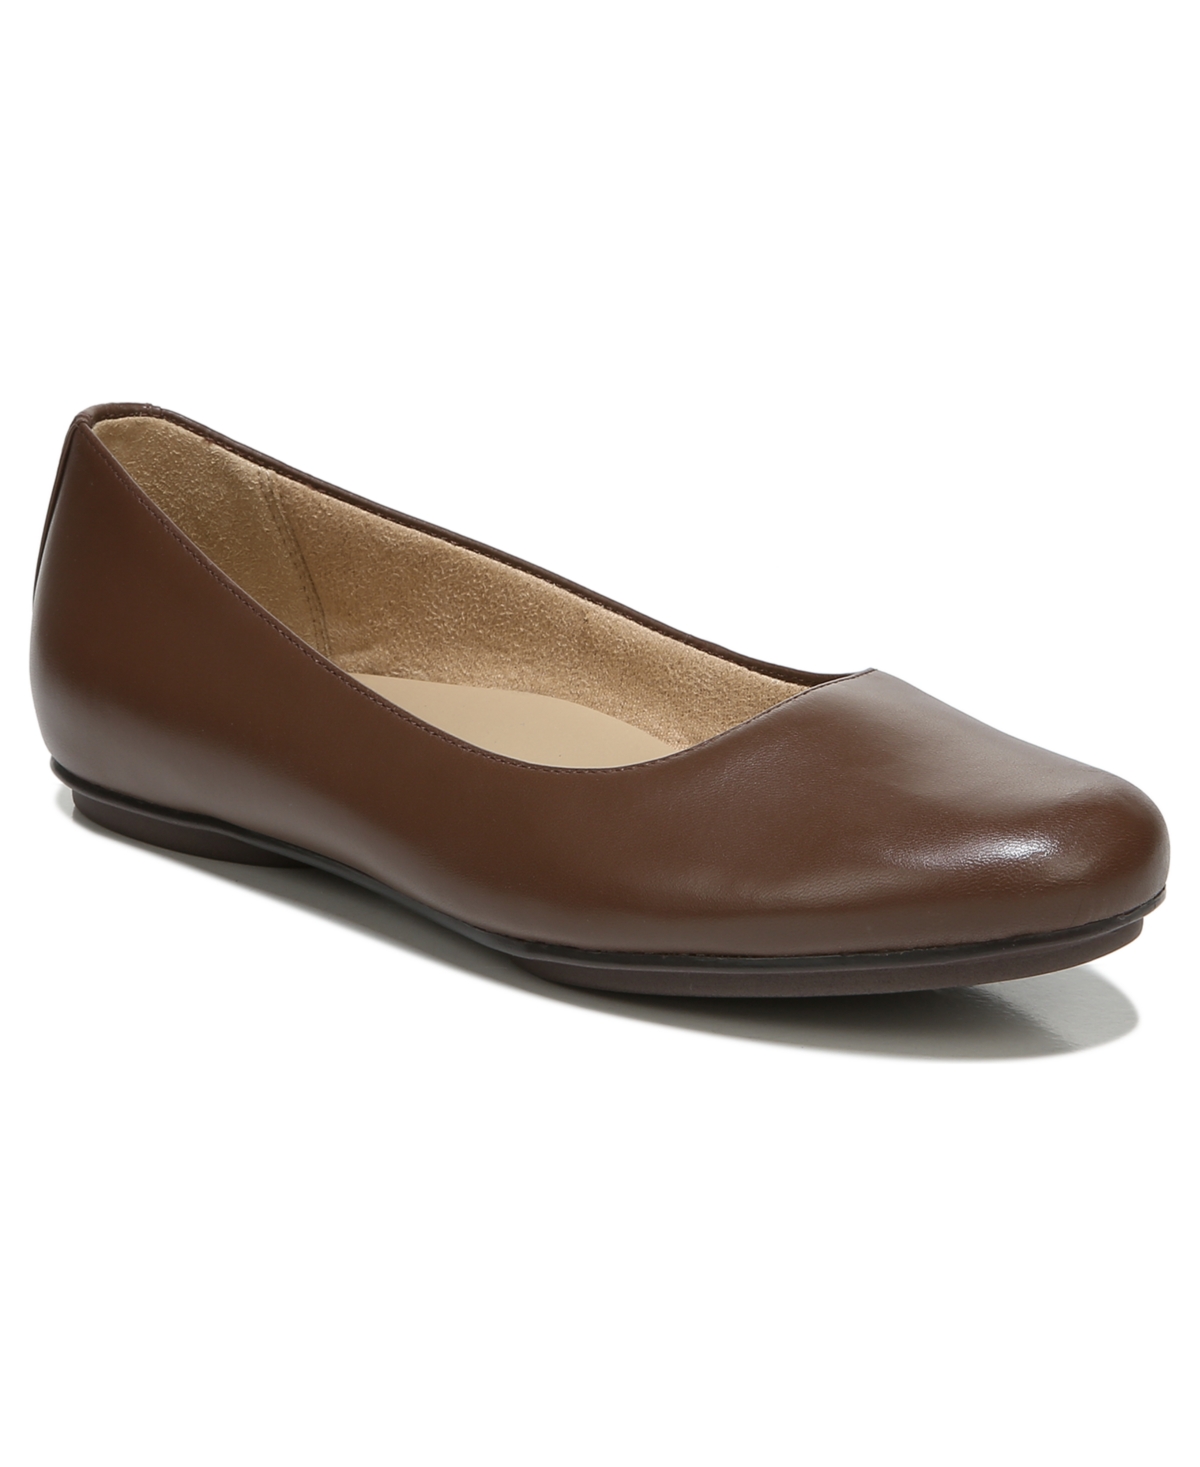 UPC 017124000113 product image for Naturalizer Maxwell Flats True Colors Women's Shoes | upcitemdb.com